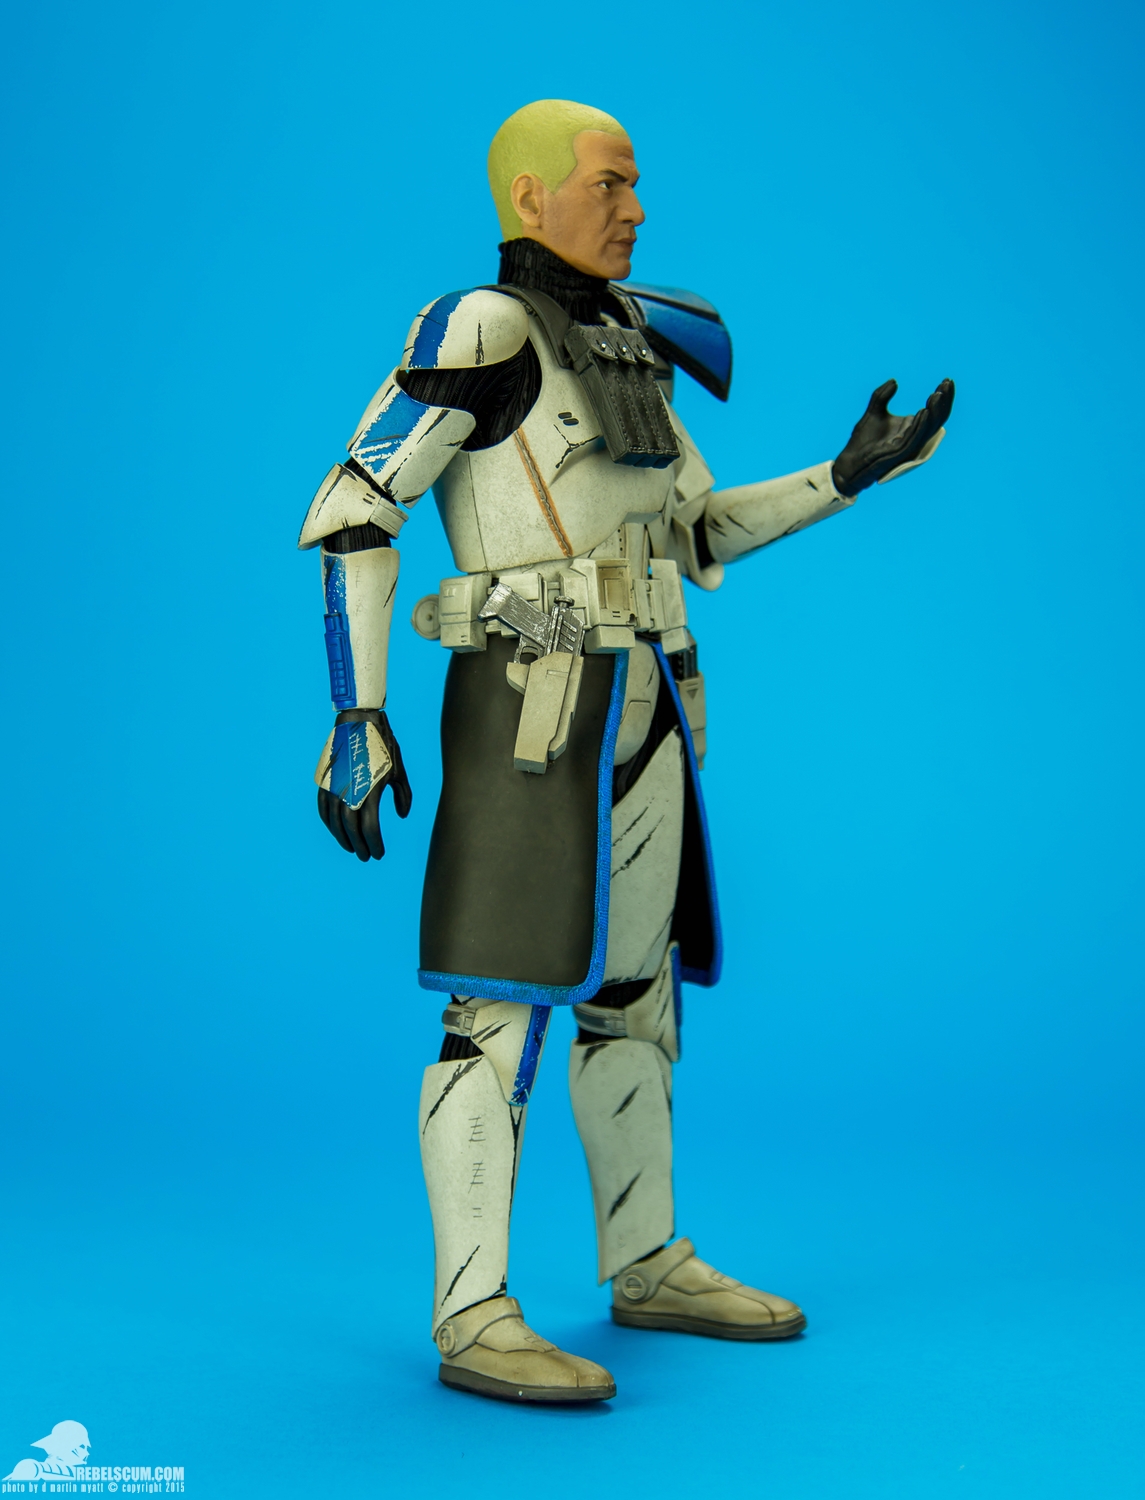 Captain-Rex-Phase-II-Sixth-Scale-Figure-Sideshow-Collectibles-002.jpg